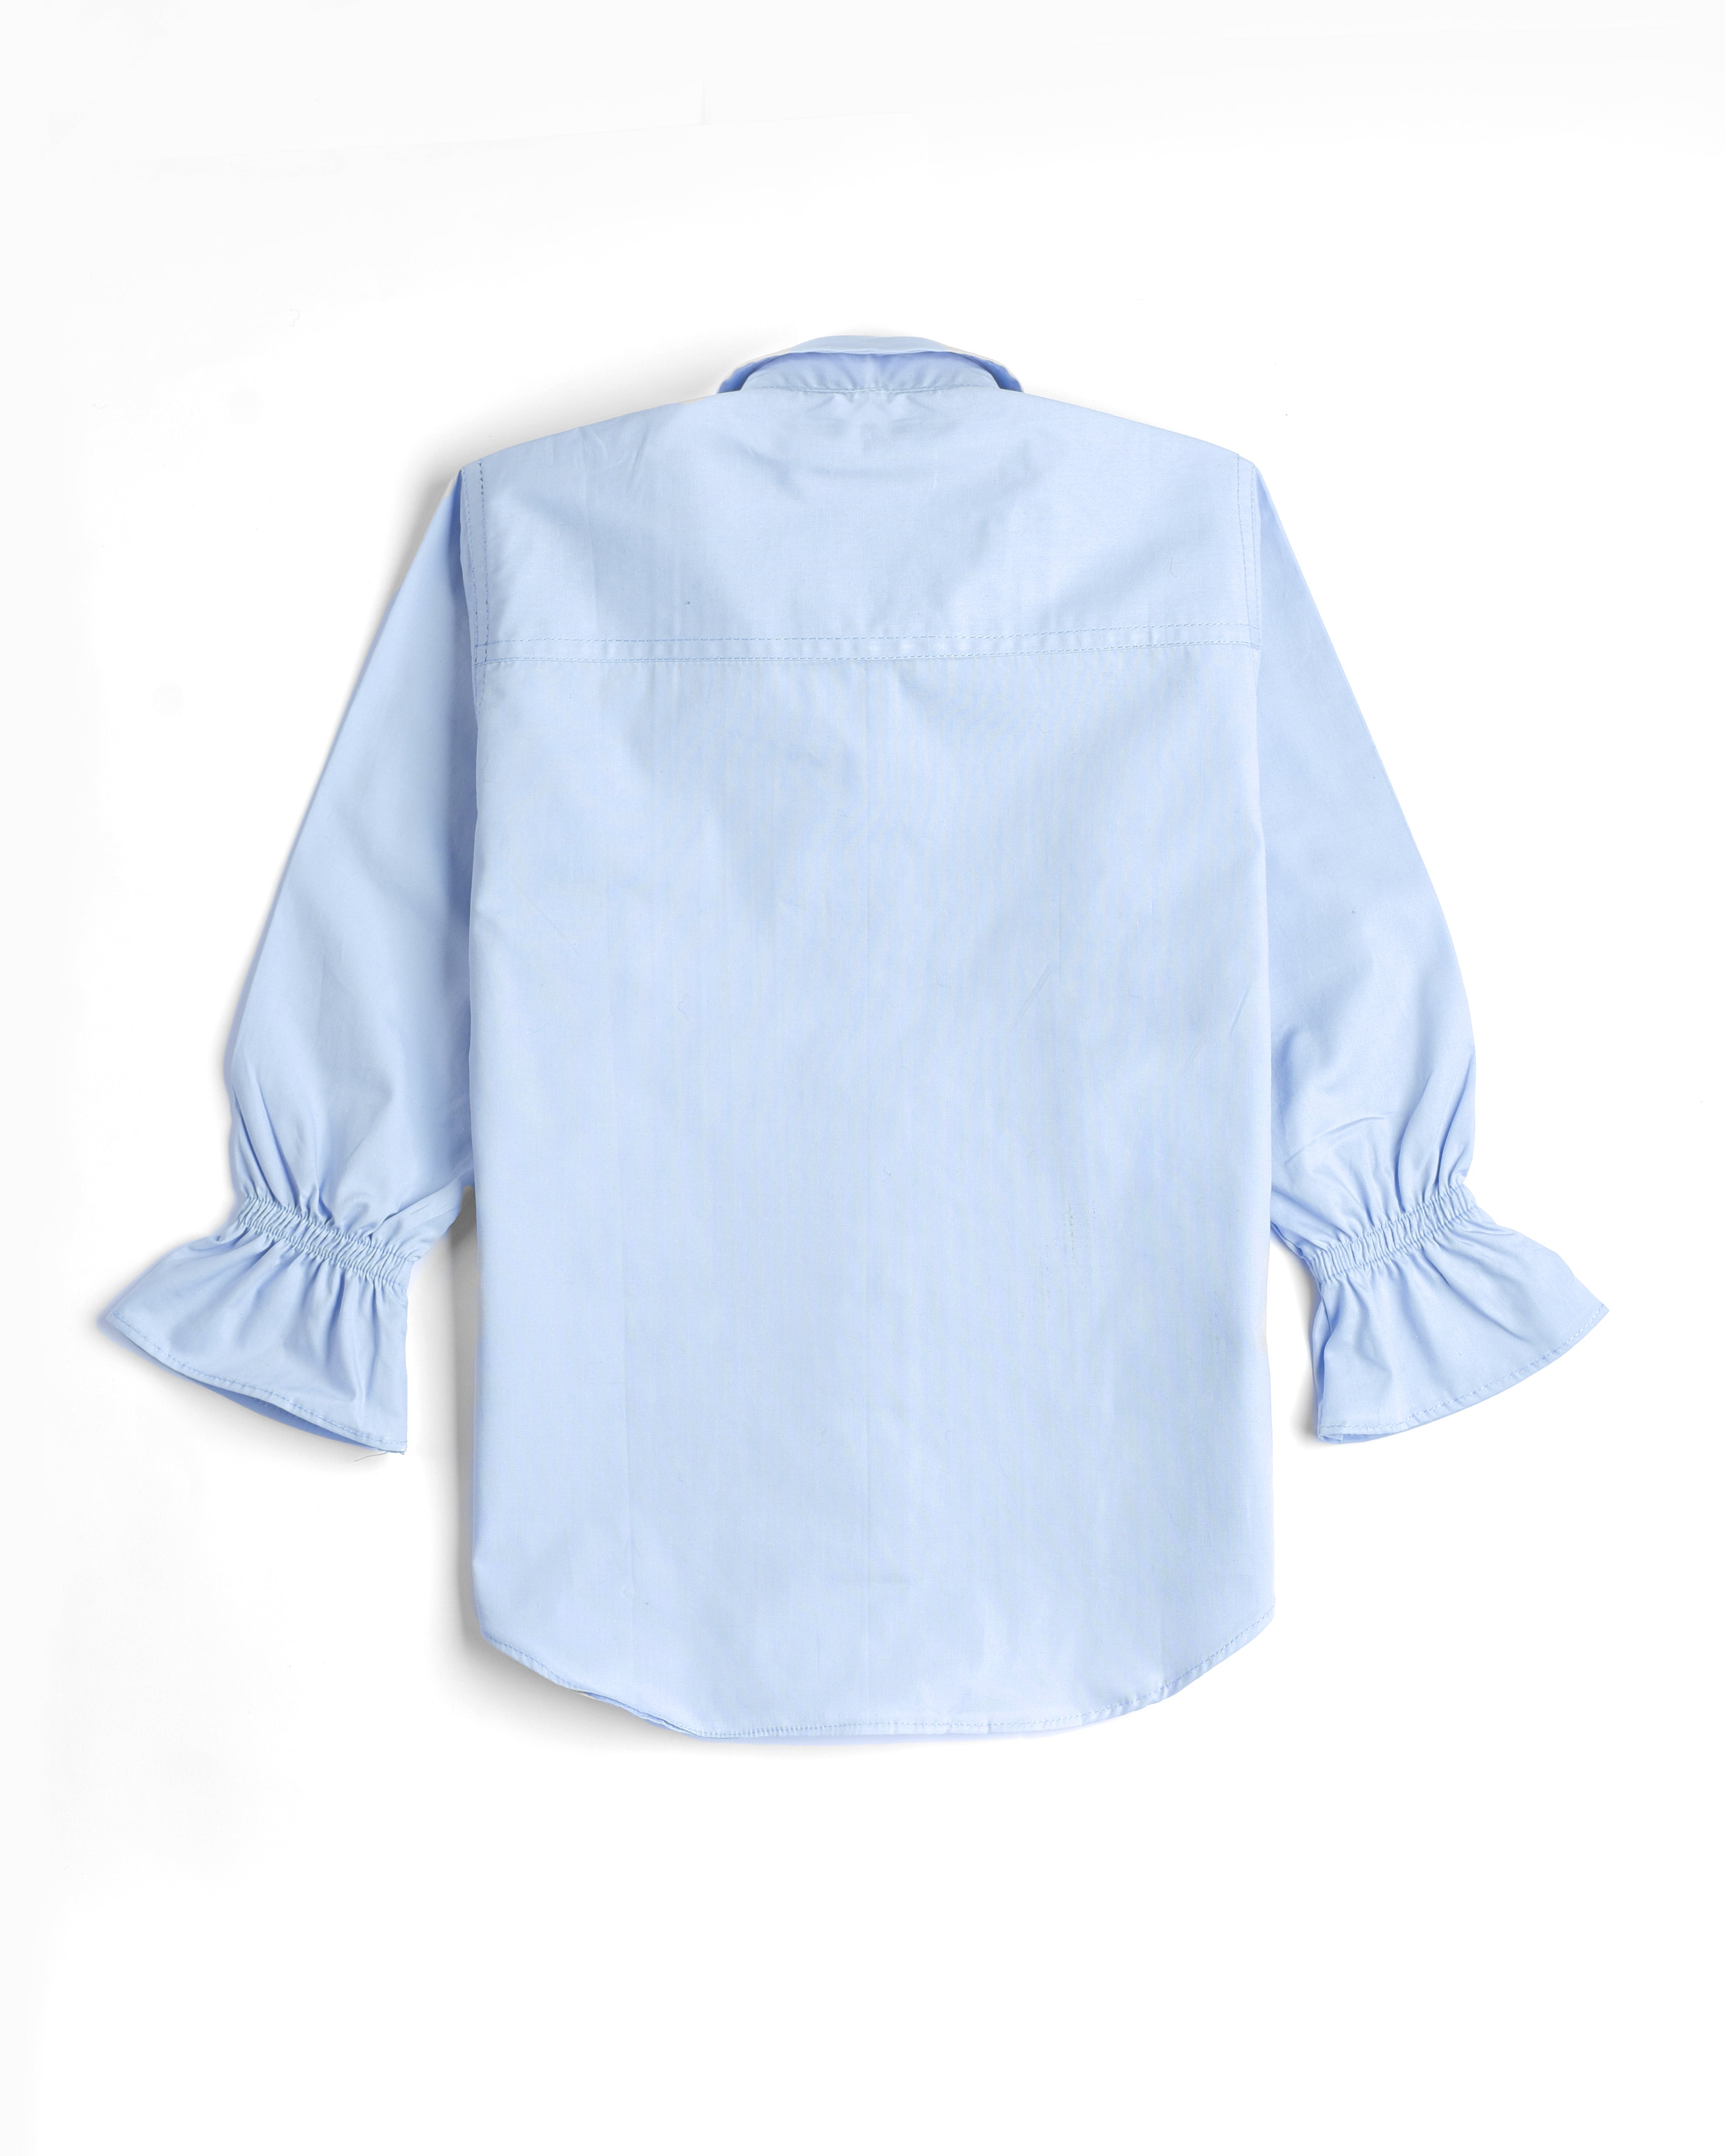 LIGHT BLUE PLEATED SHIRT WITH WHITE RIBBON